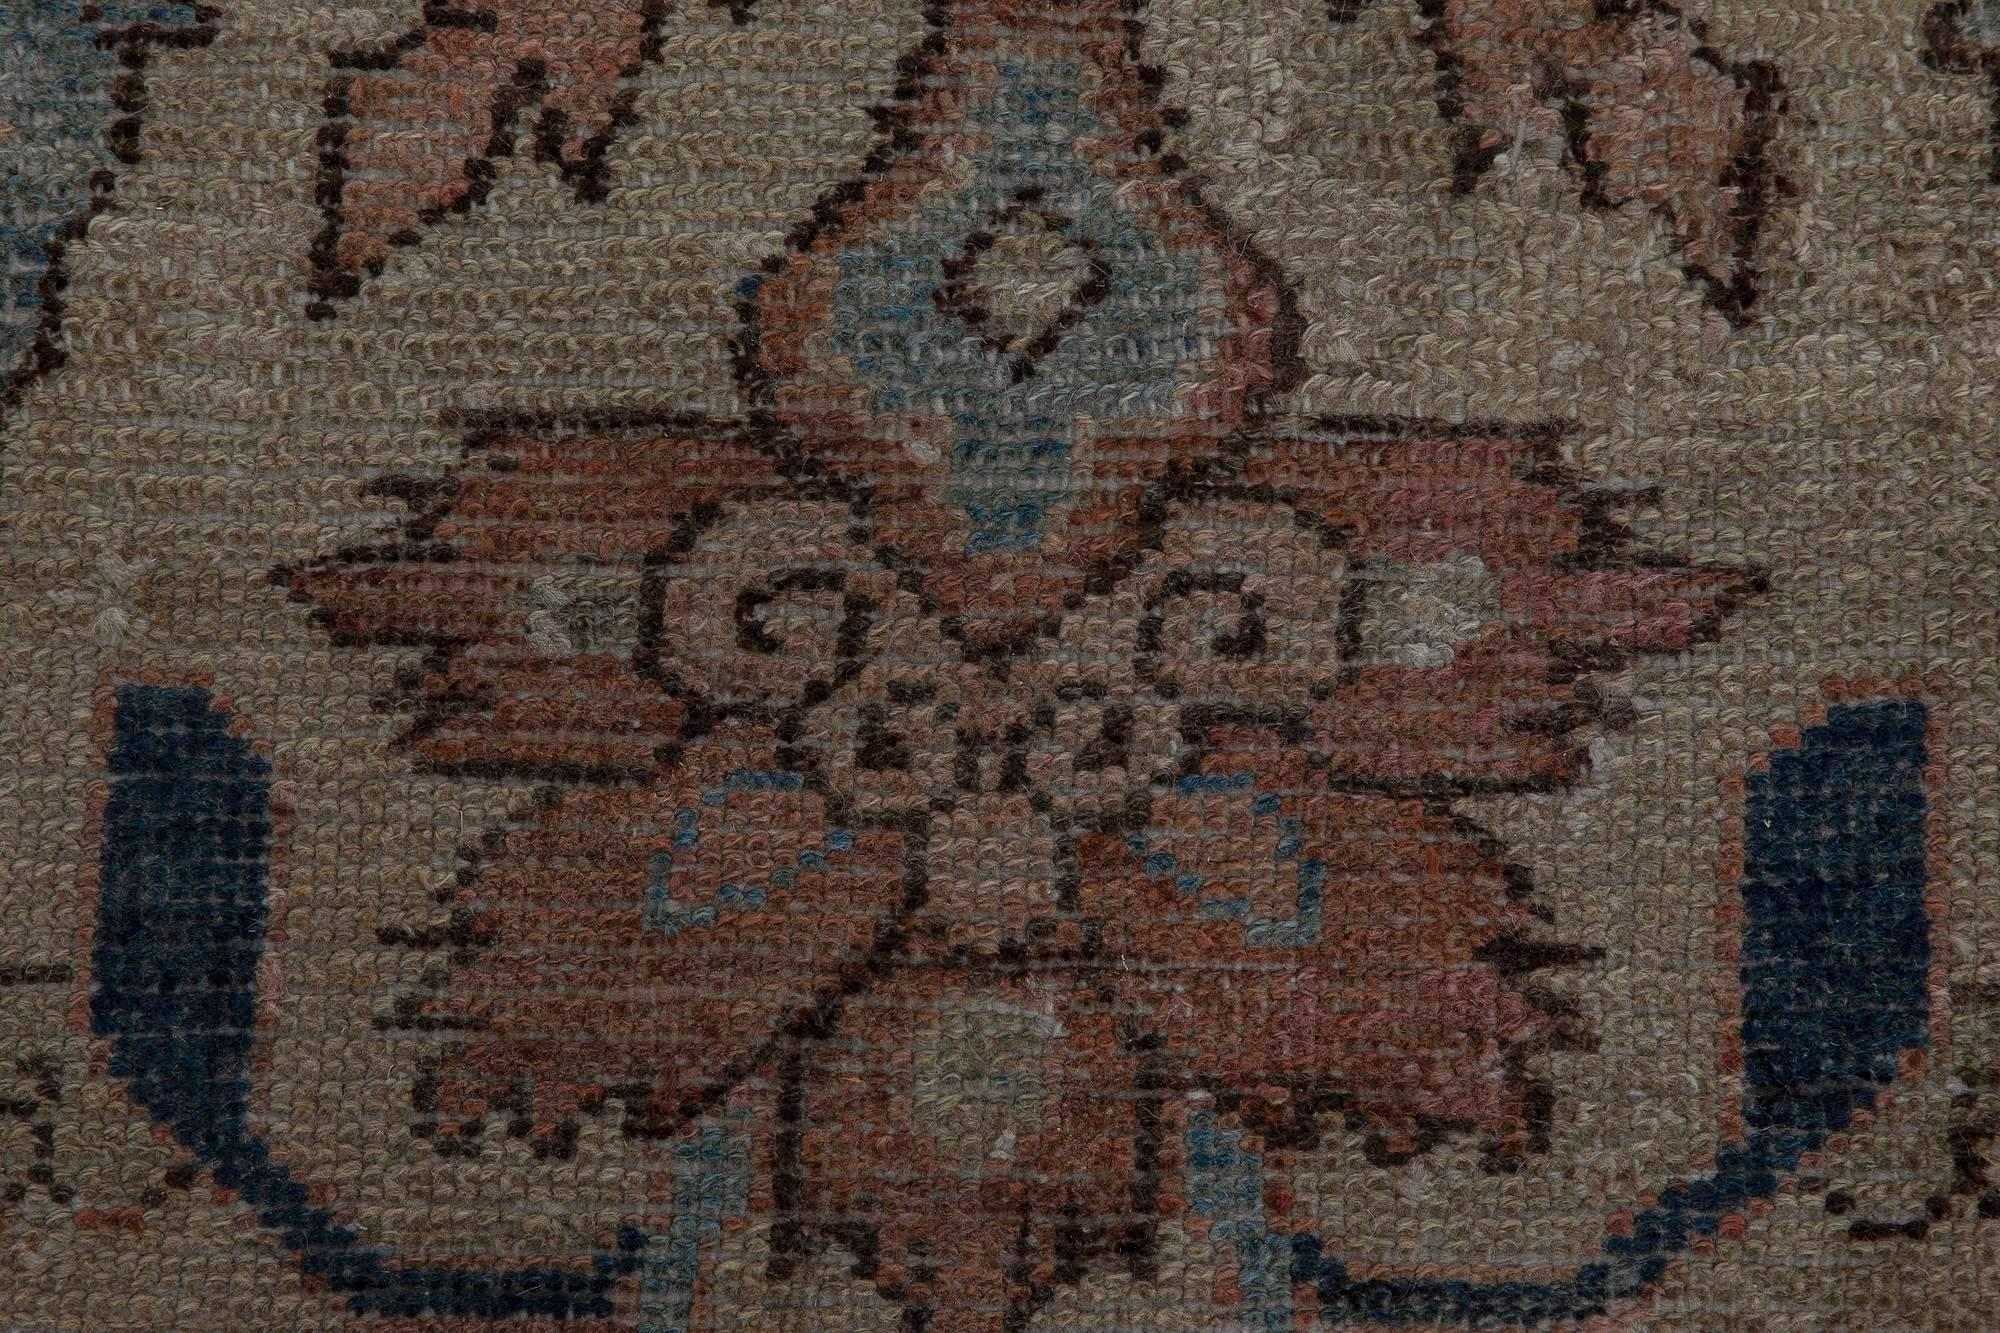 Neutral beige, soft blues and pinks antique Persian Malayer rug
Size: 13'7